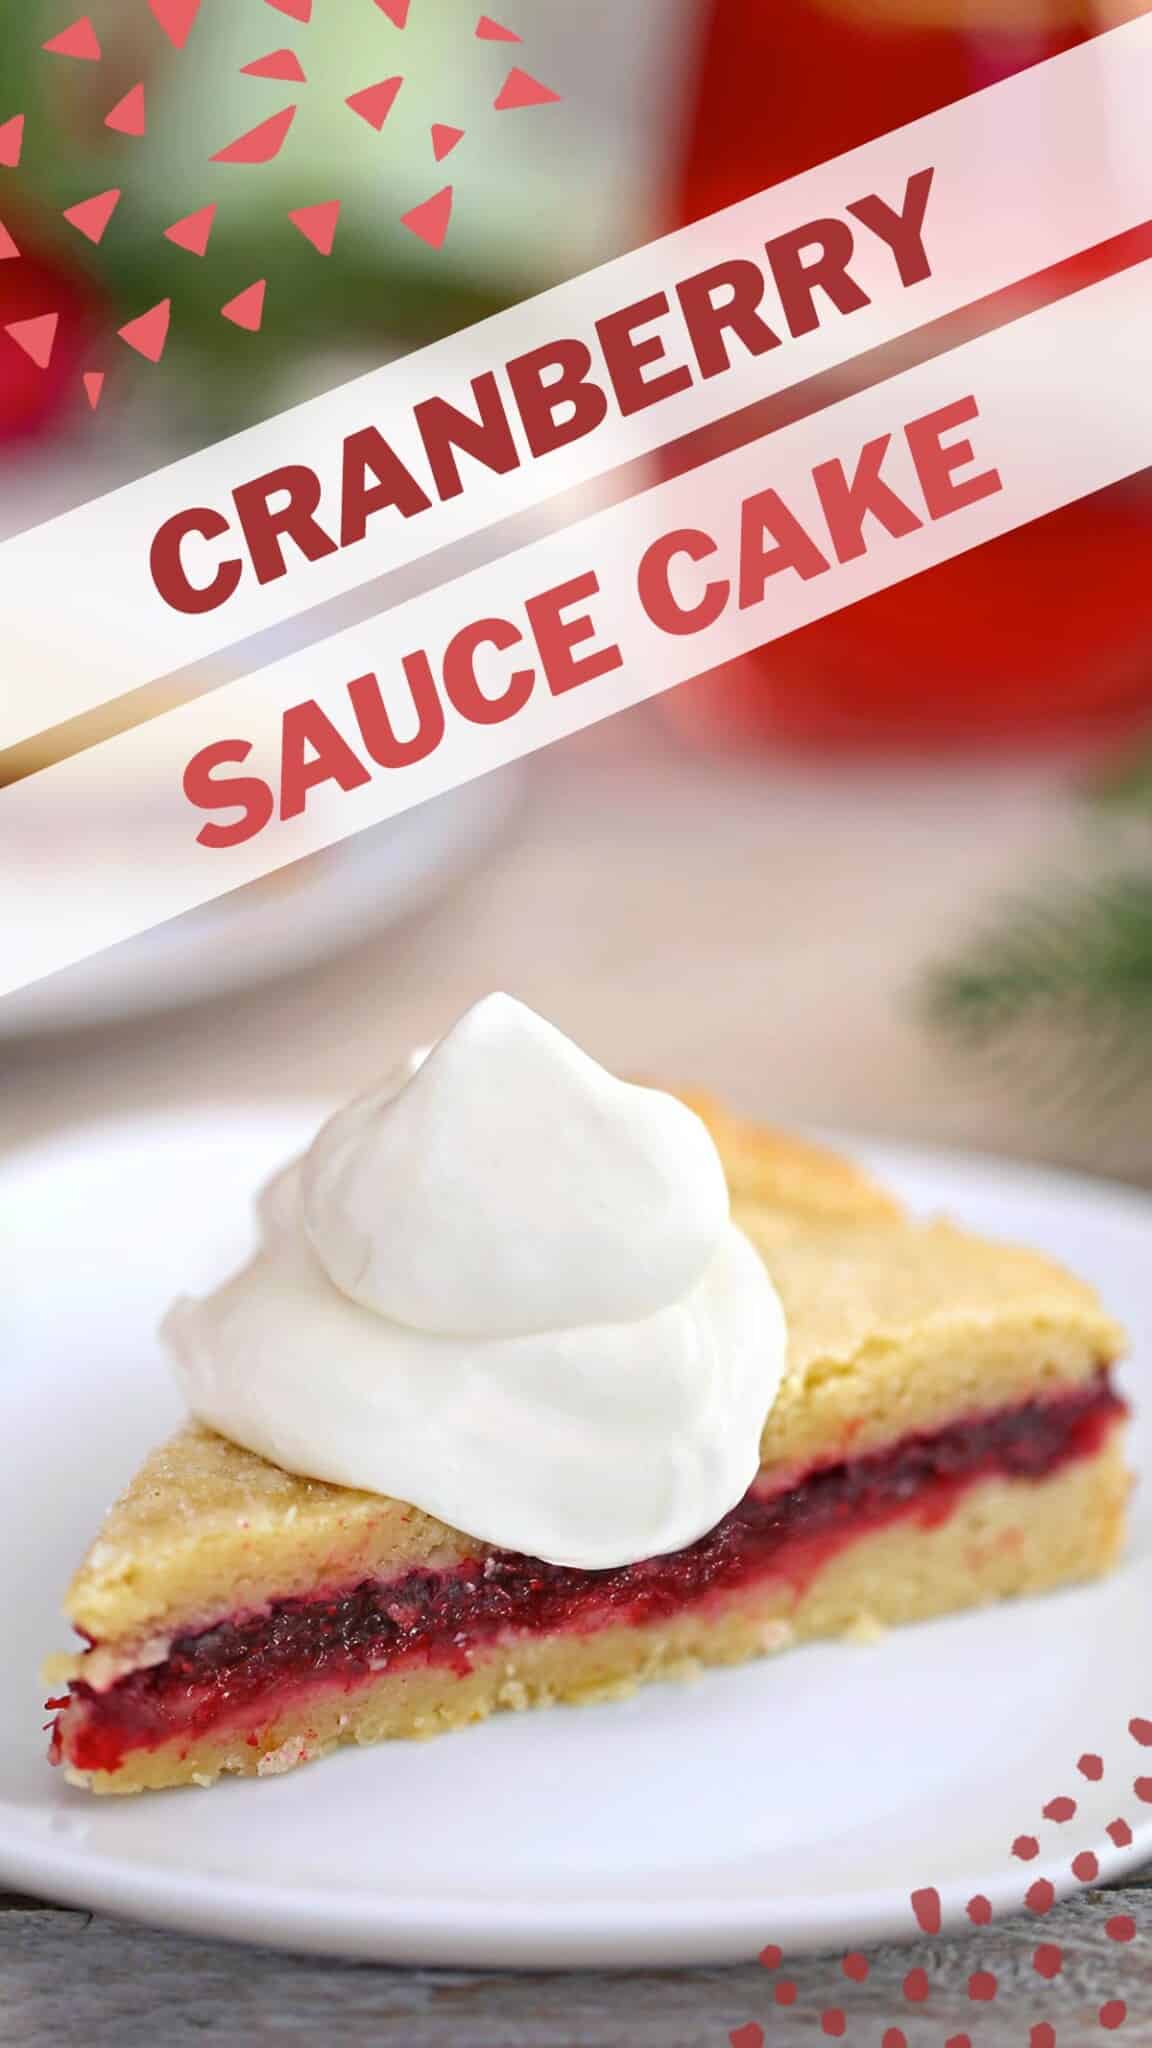 Picture of Cranberry Sauce Cake with text overlay for Pinterest.